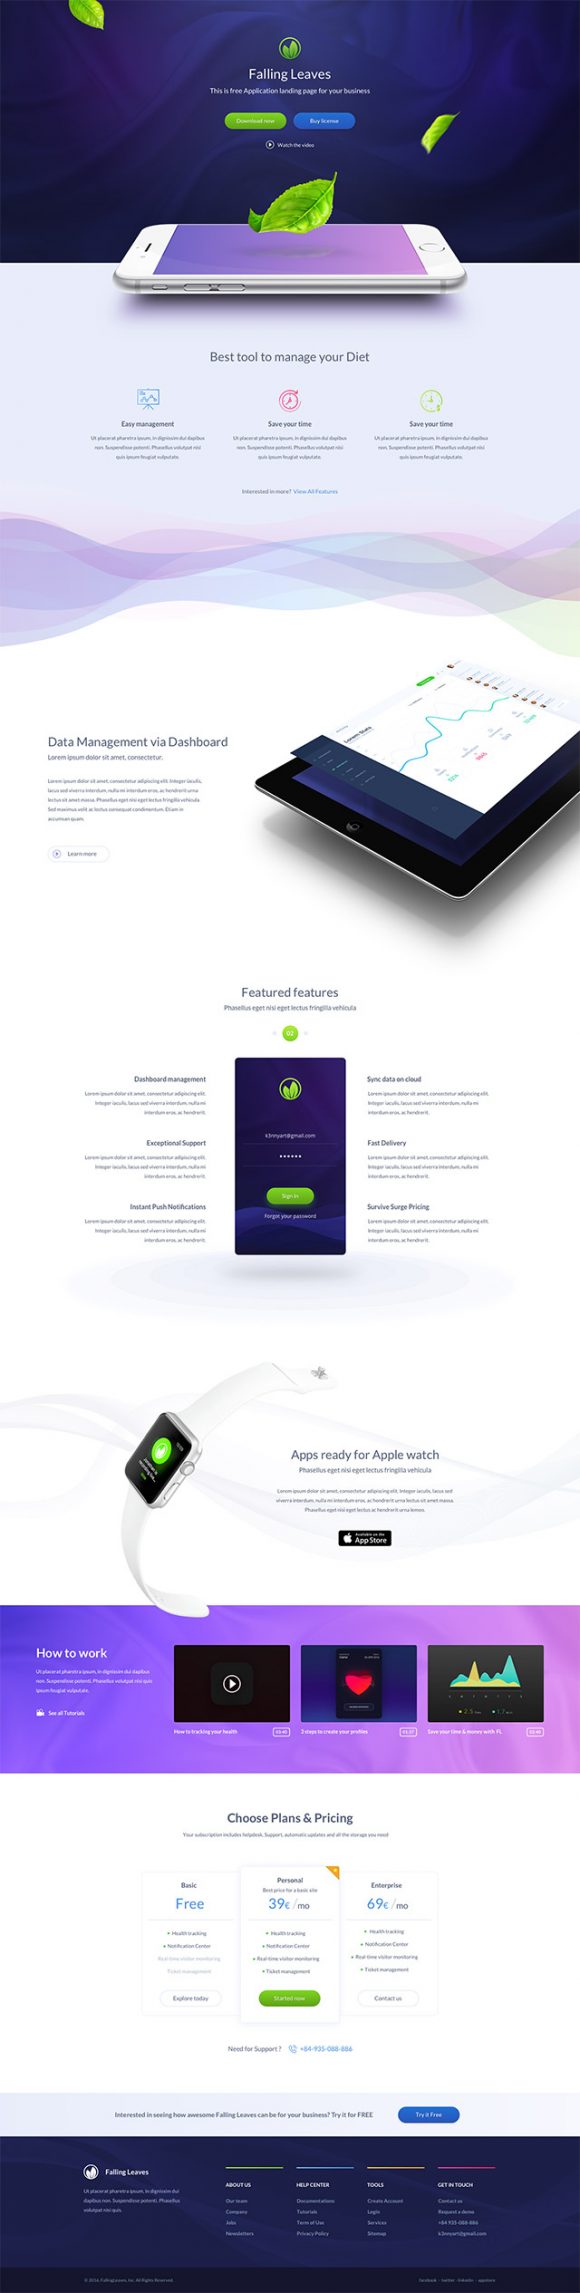 One Page landing template for mobile apps - Full preview